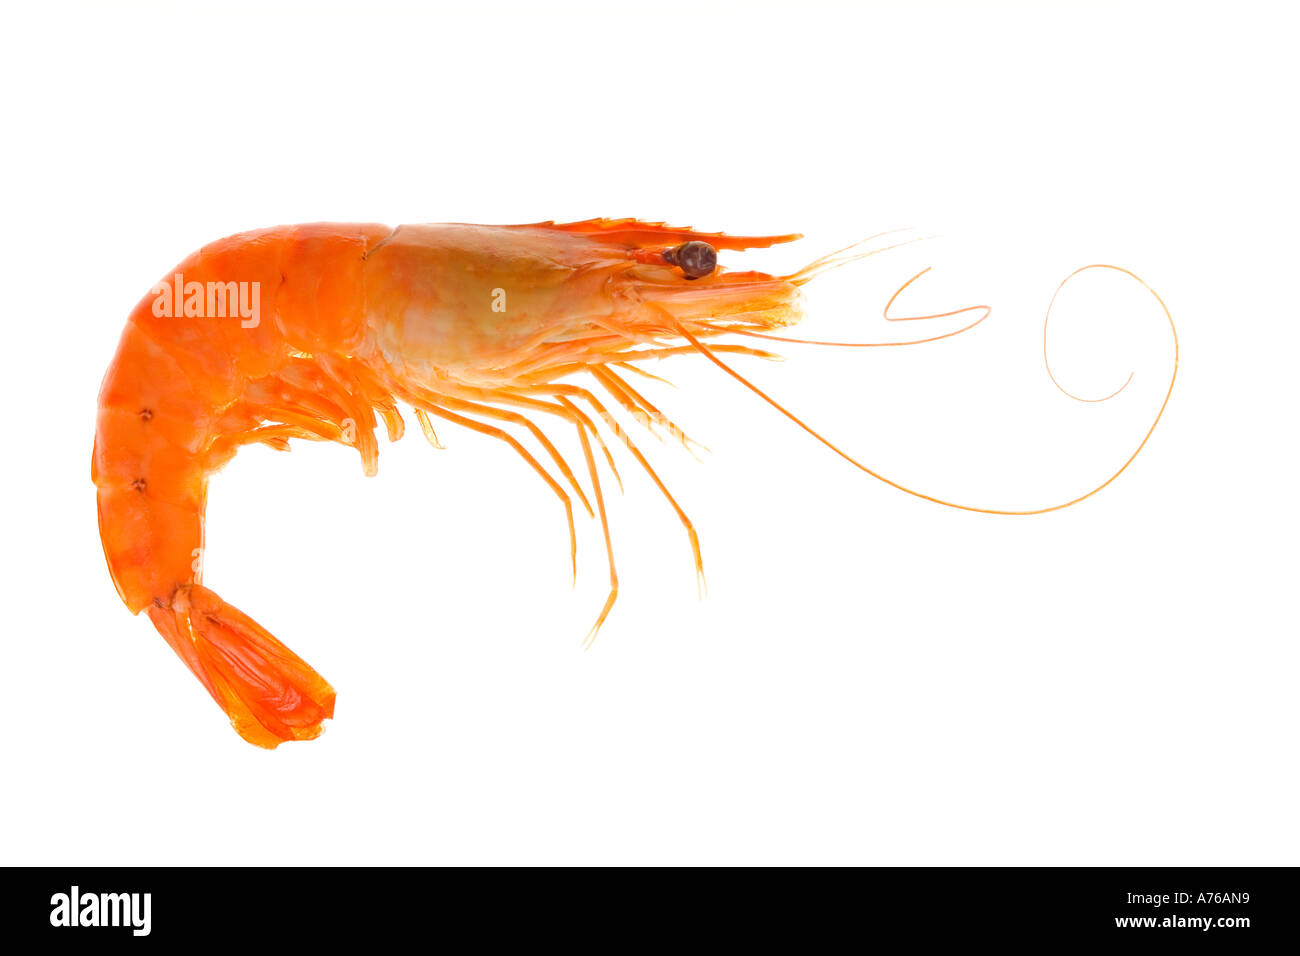 Single unpeeled cooked whole prawn on a pure white background. Stock Photo